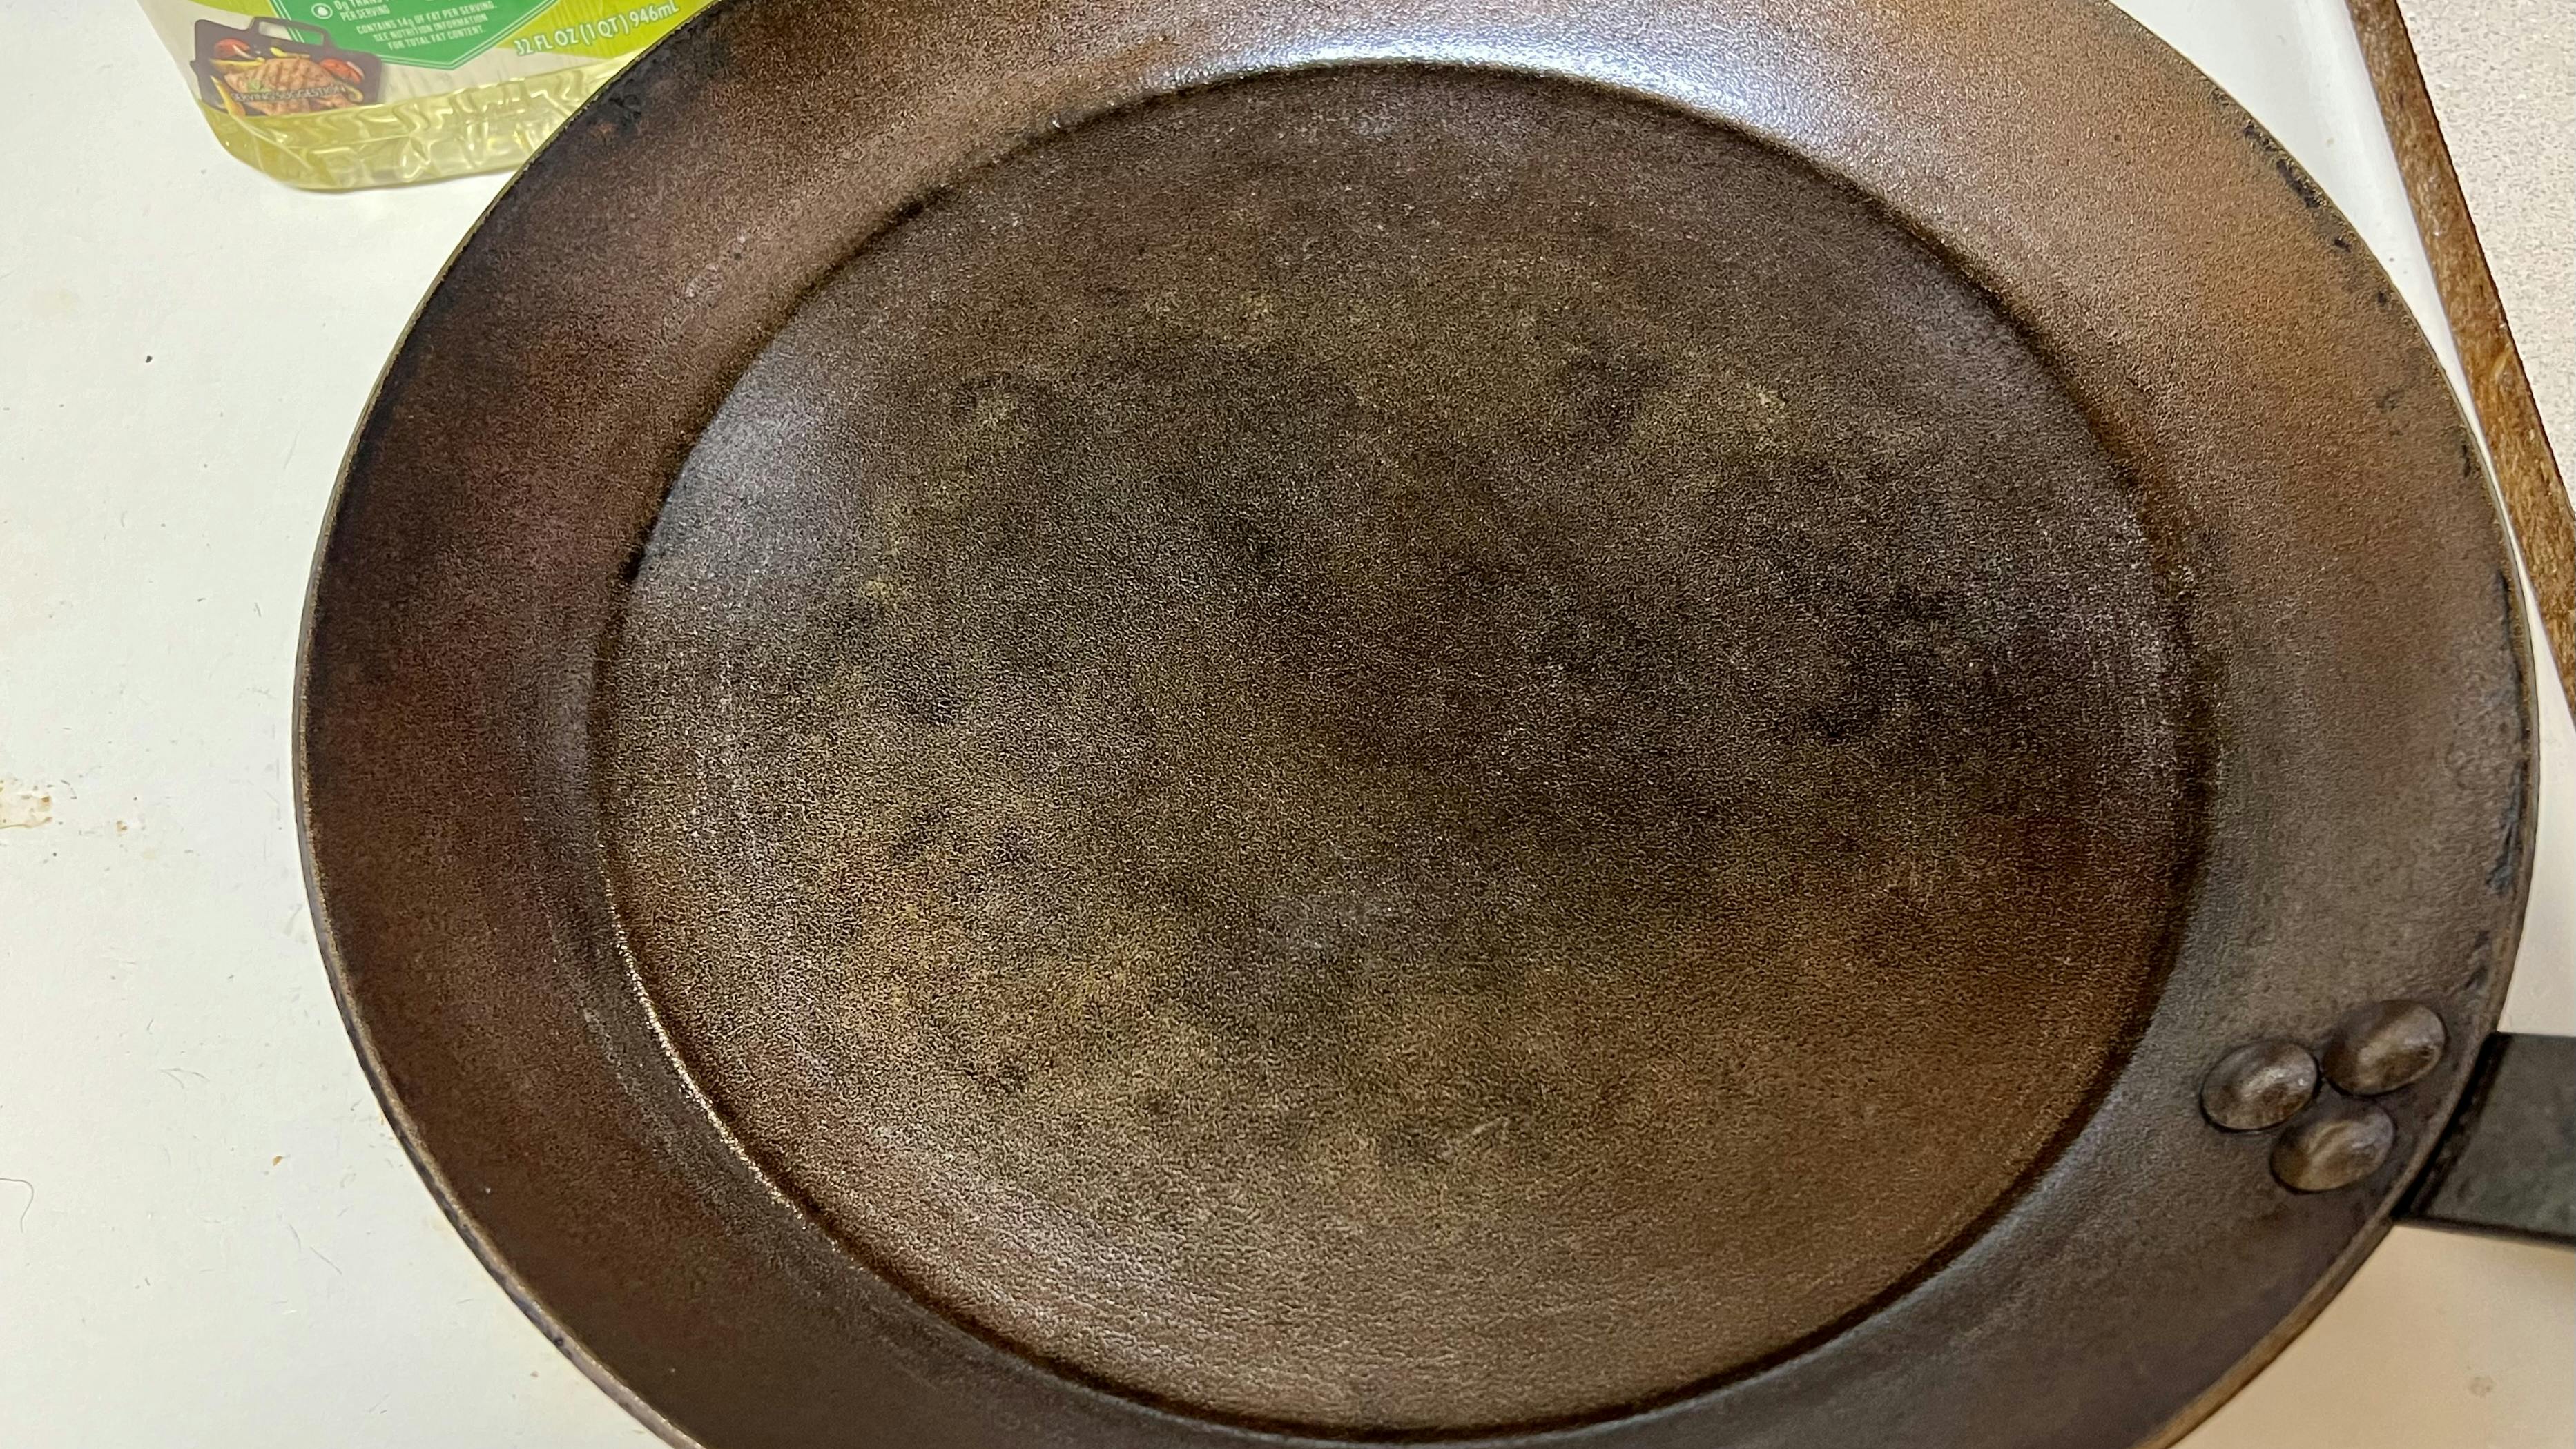 A carbon steel pan with a thin coat of oil.